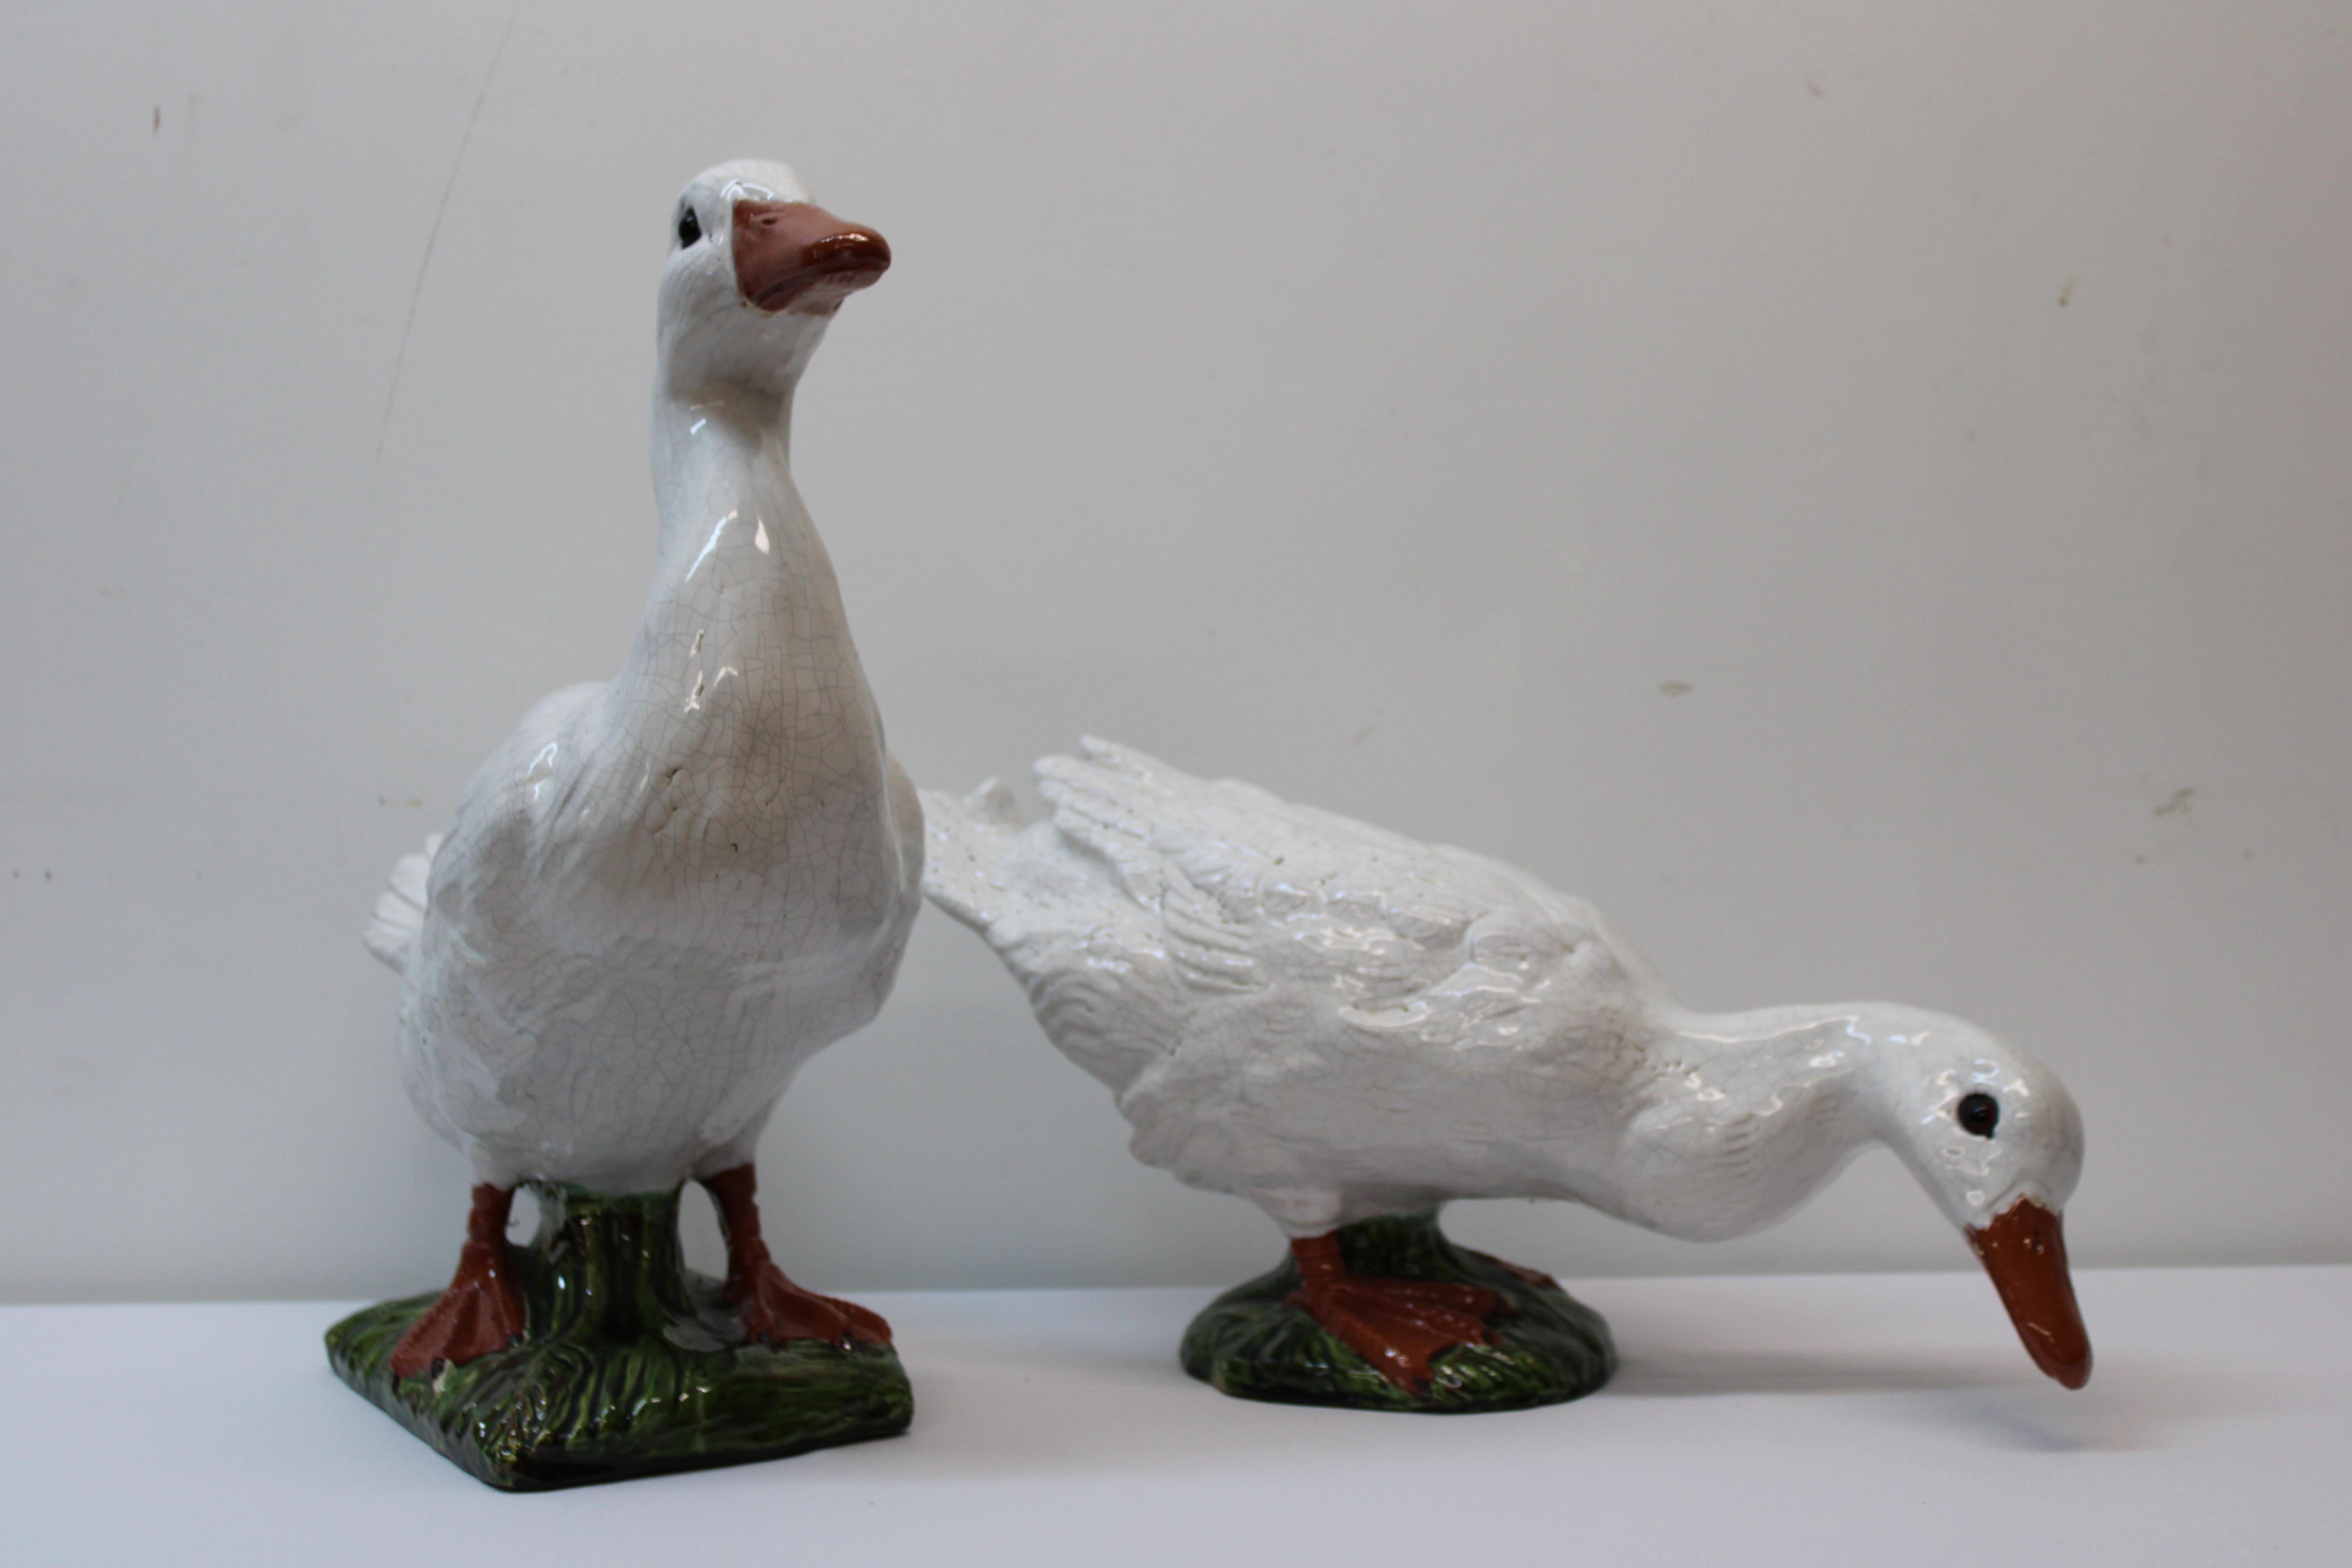 C. early 20th century

Adorable pair of Bavent Faience terracotta geese w/ glass eyes 

Made in France

Measurements of Geese 

Standing goose: 16